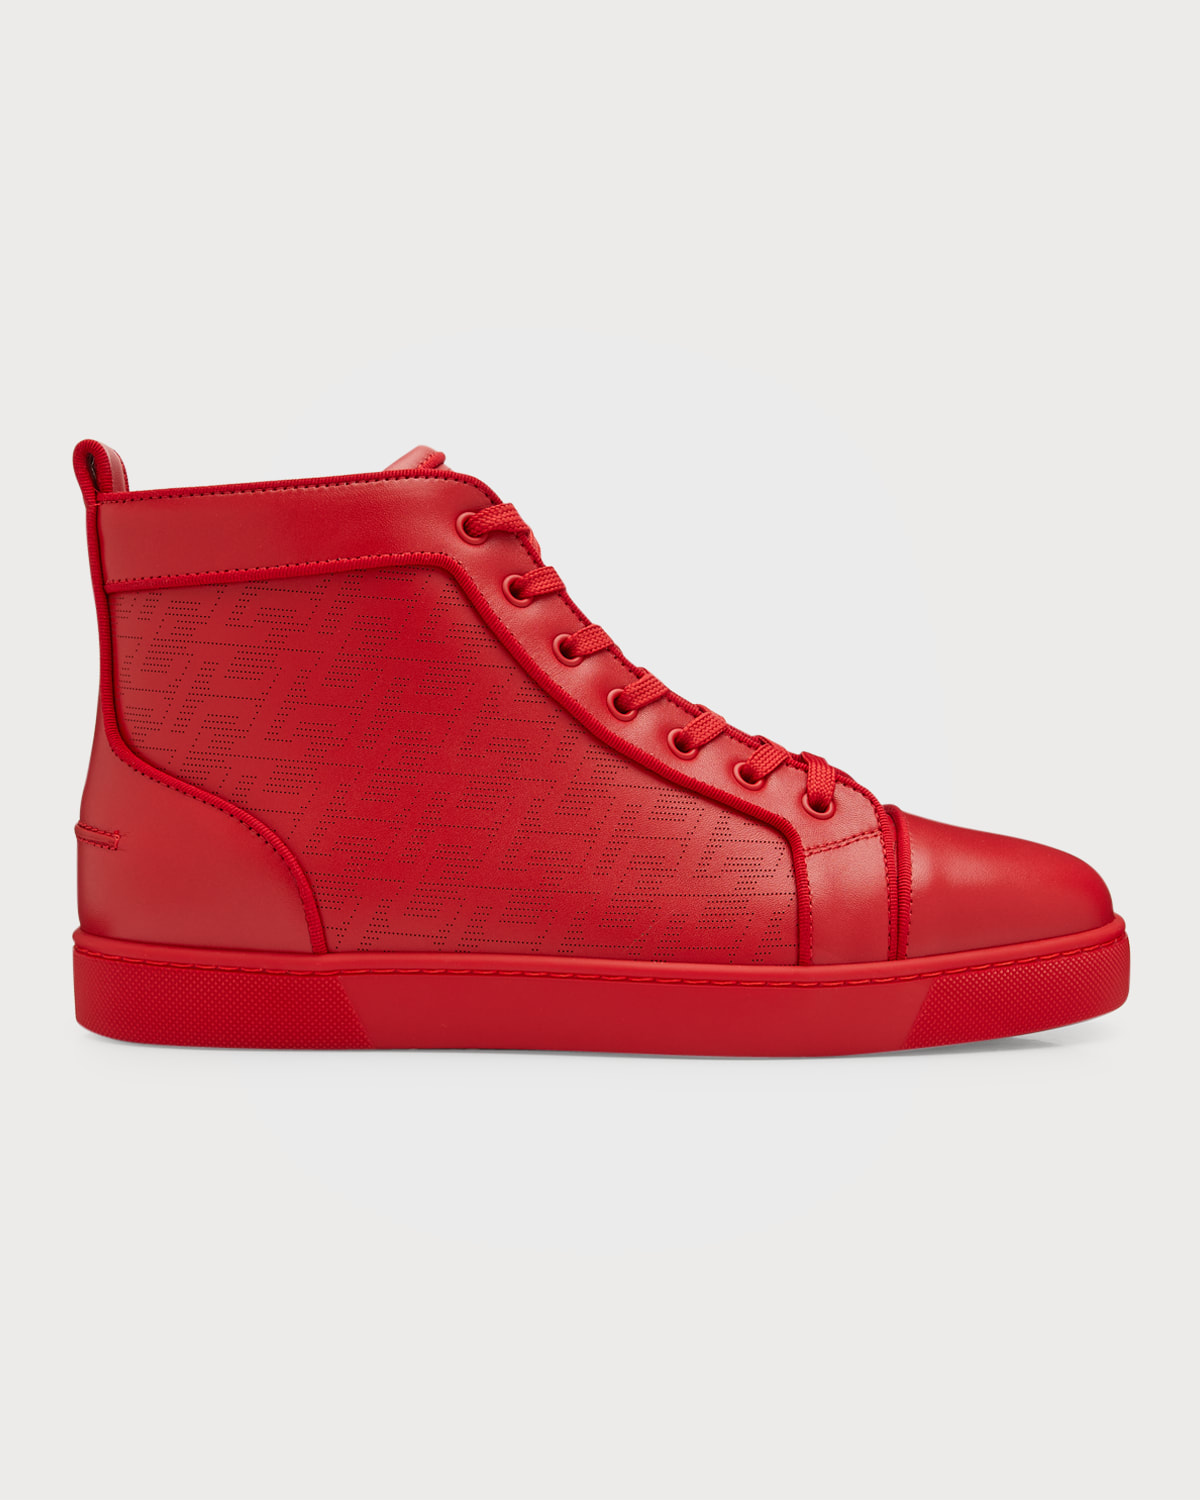 CHRISTIAN LOUBOUTIN MEN'S LOUIS TONAL PERFORATED LEATHER HIGH-TOP SNEAKERS